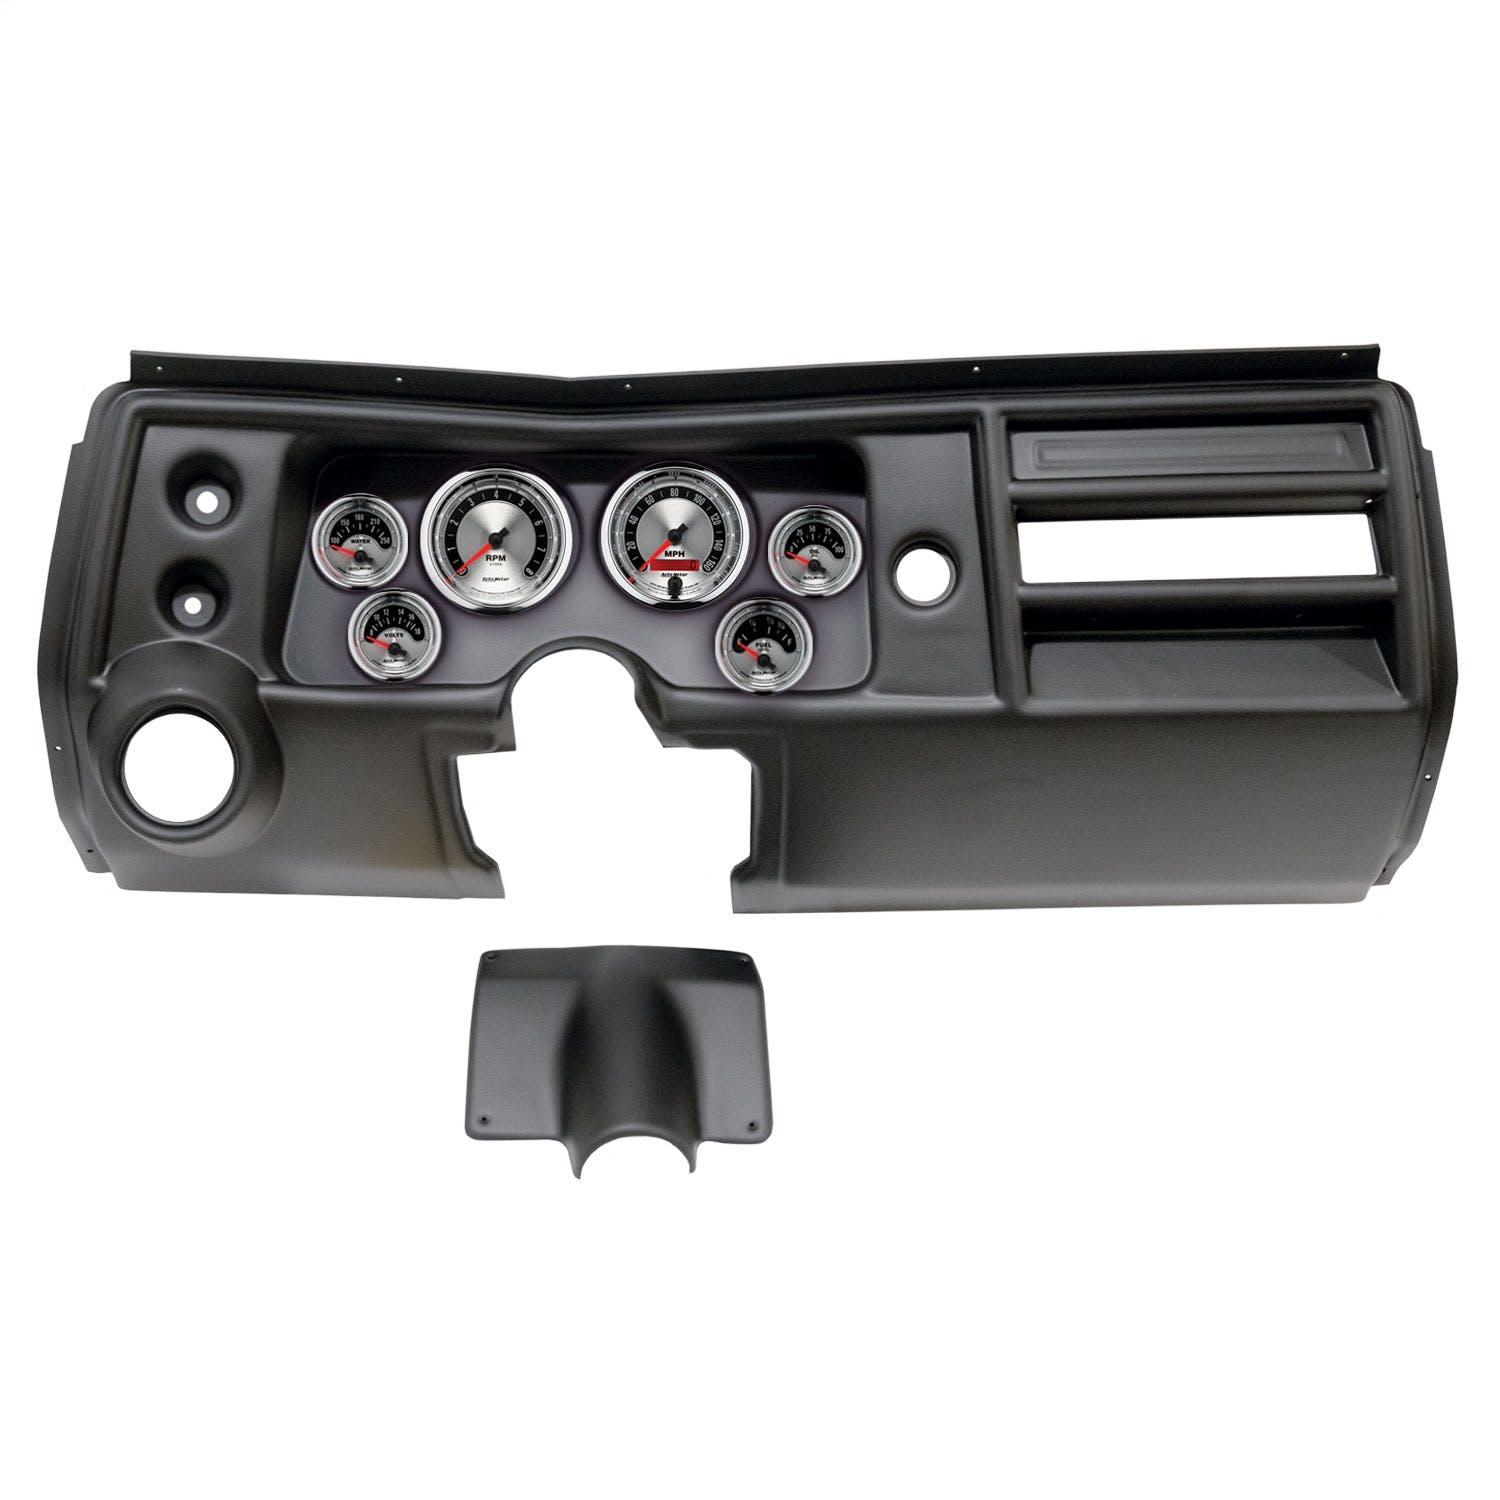 AutoMeter Products 2902-01 6 Gauge Direct-Fit Dash Kit, Chevy Chevelle Vent 68, American Muscle